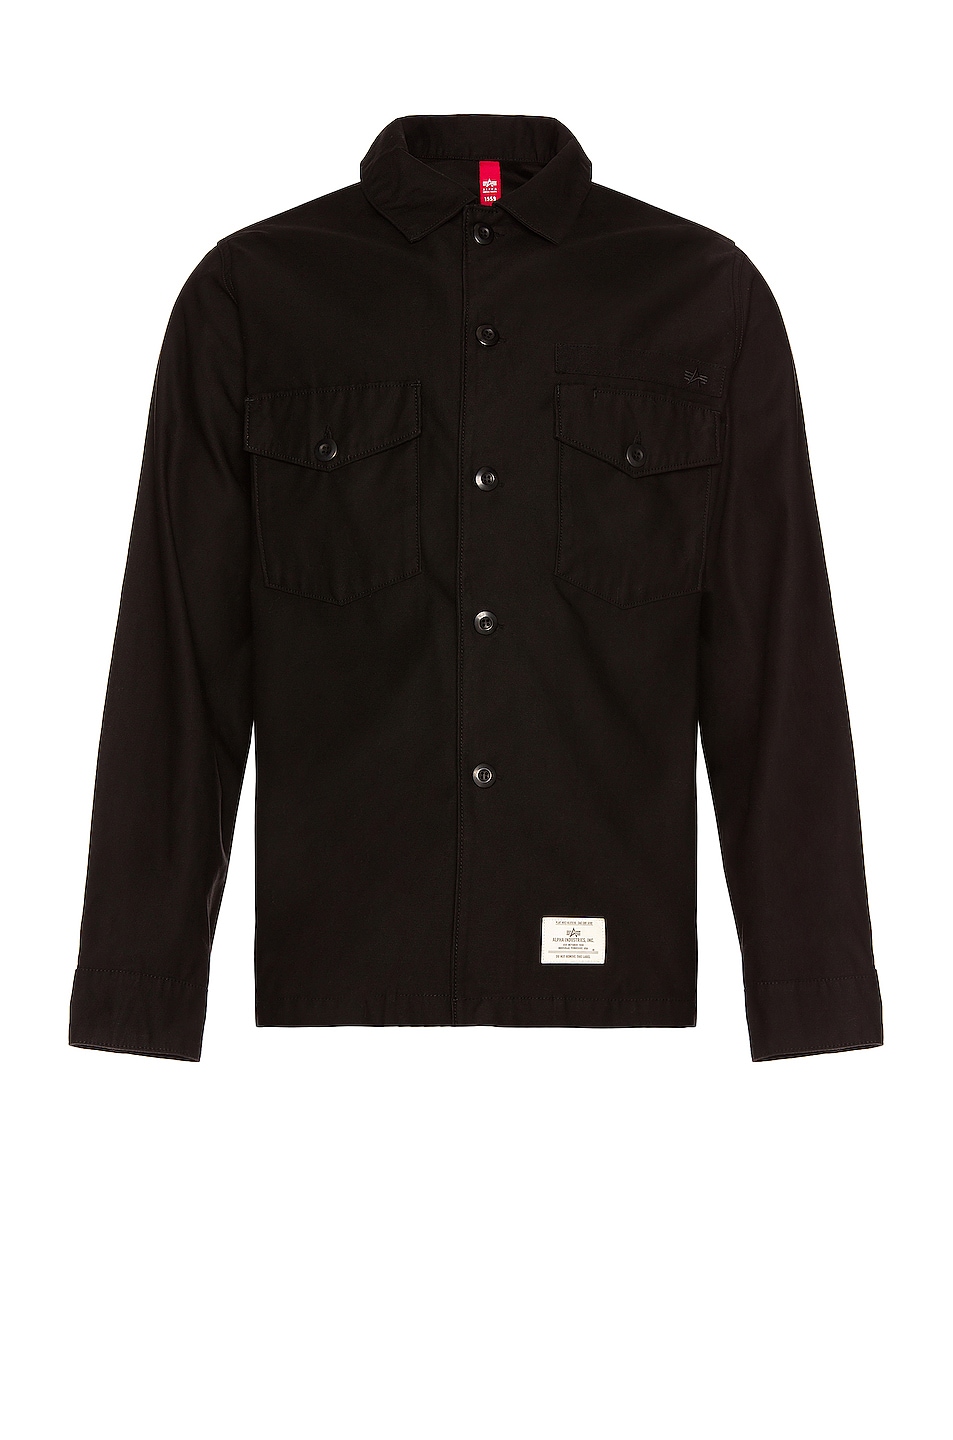 Image 1 of ALPHA INDUSTRIES Fatigue Shirt Jacket in Black